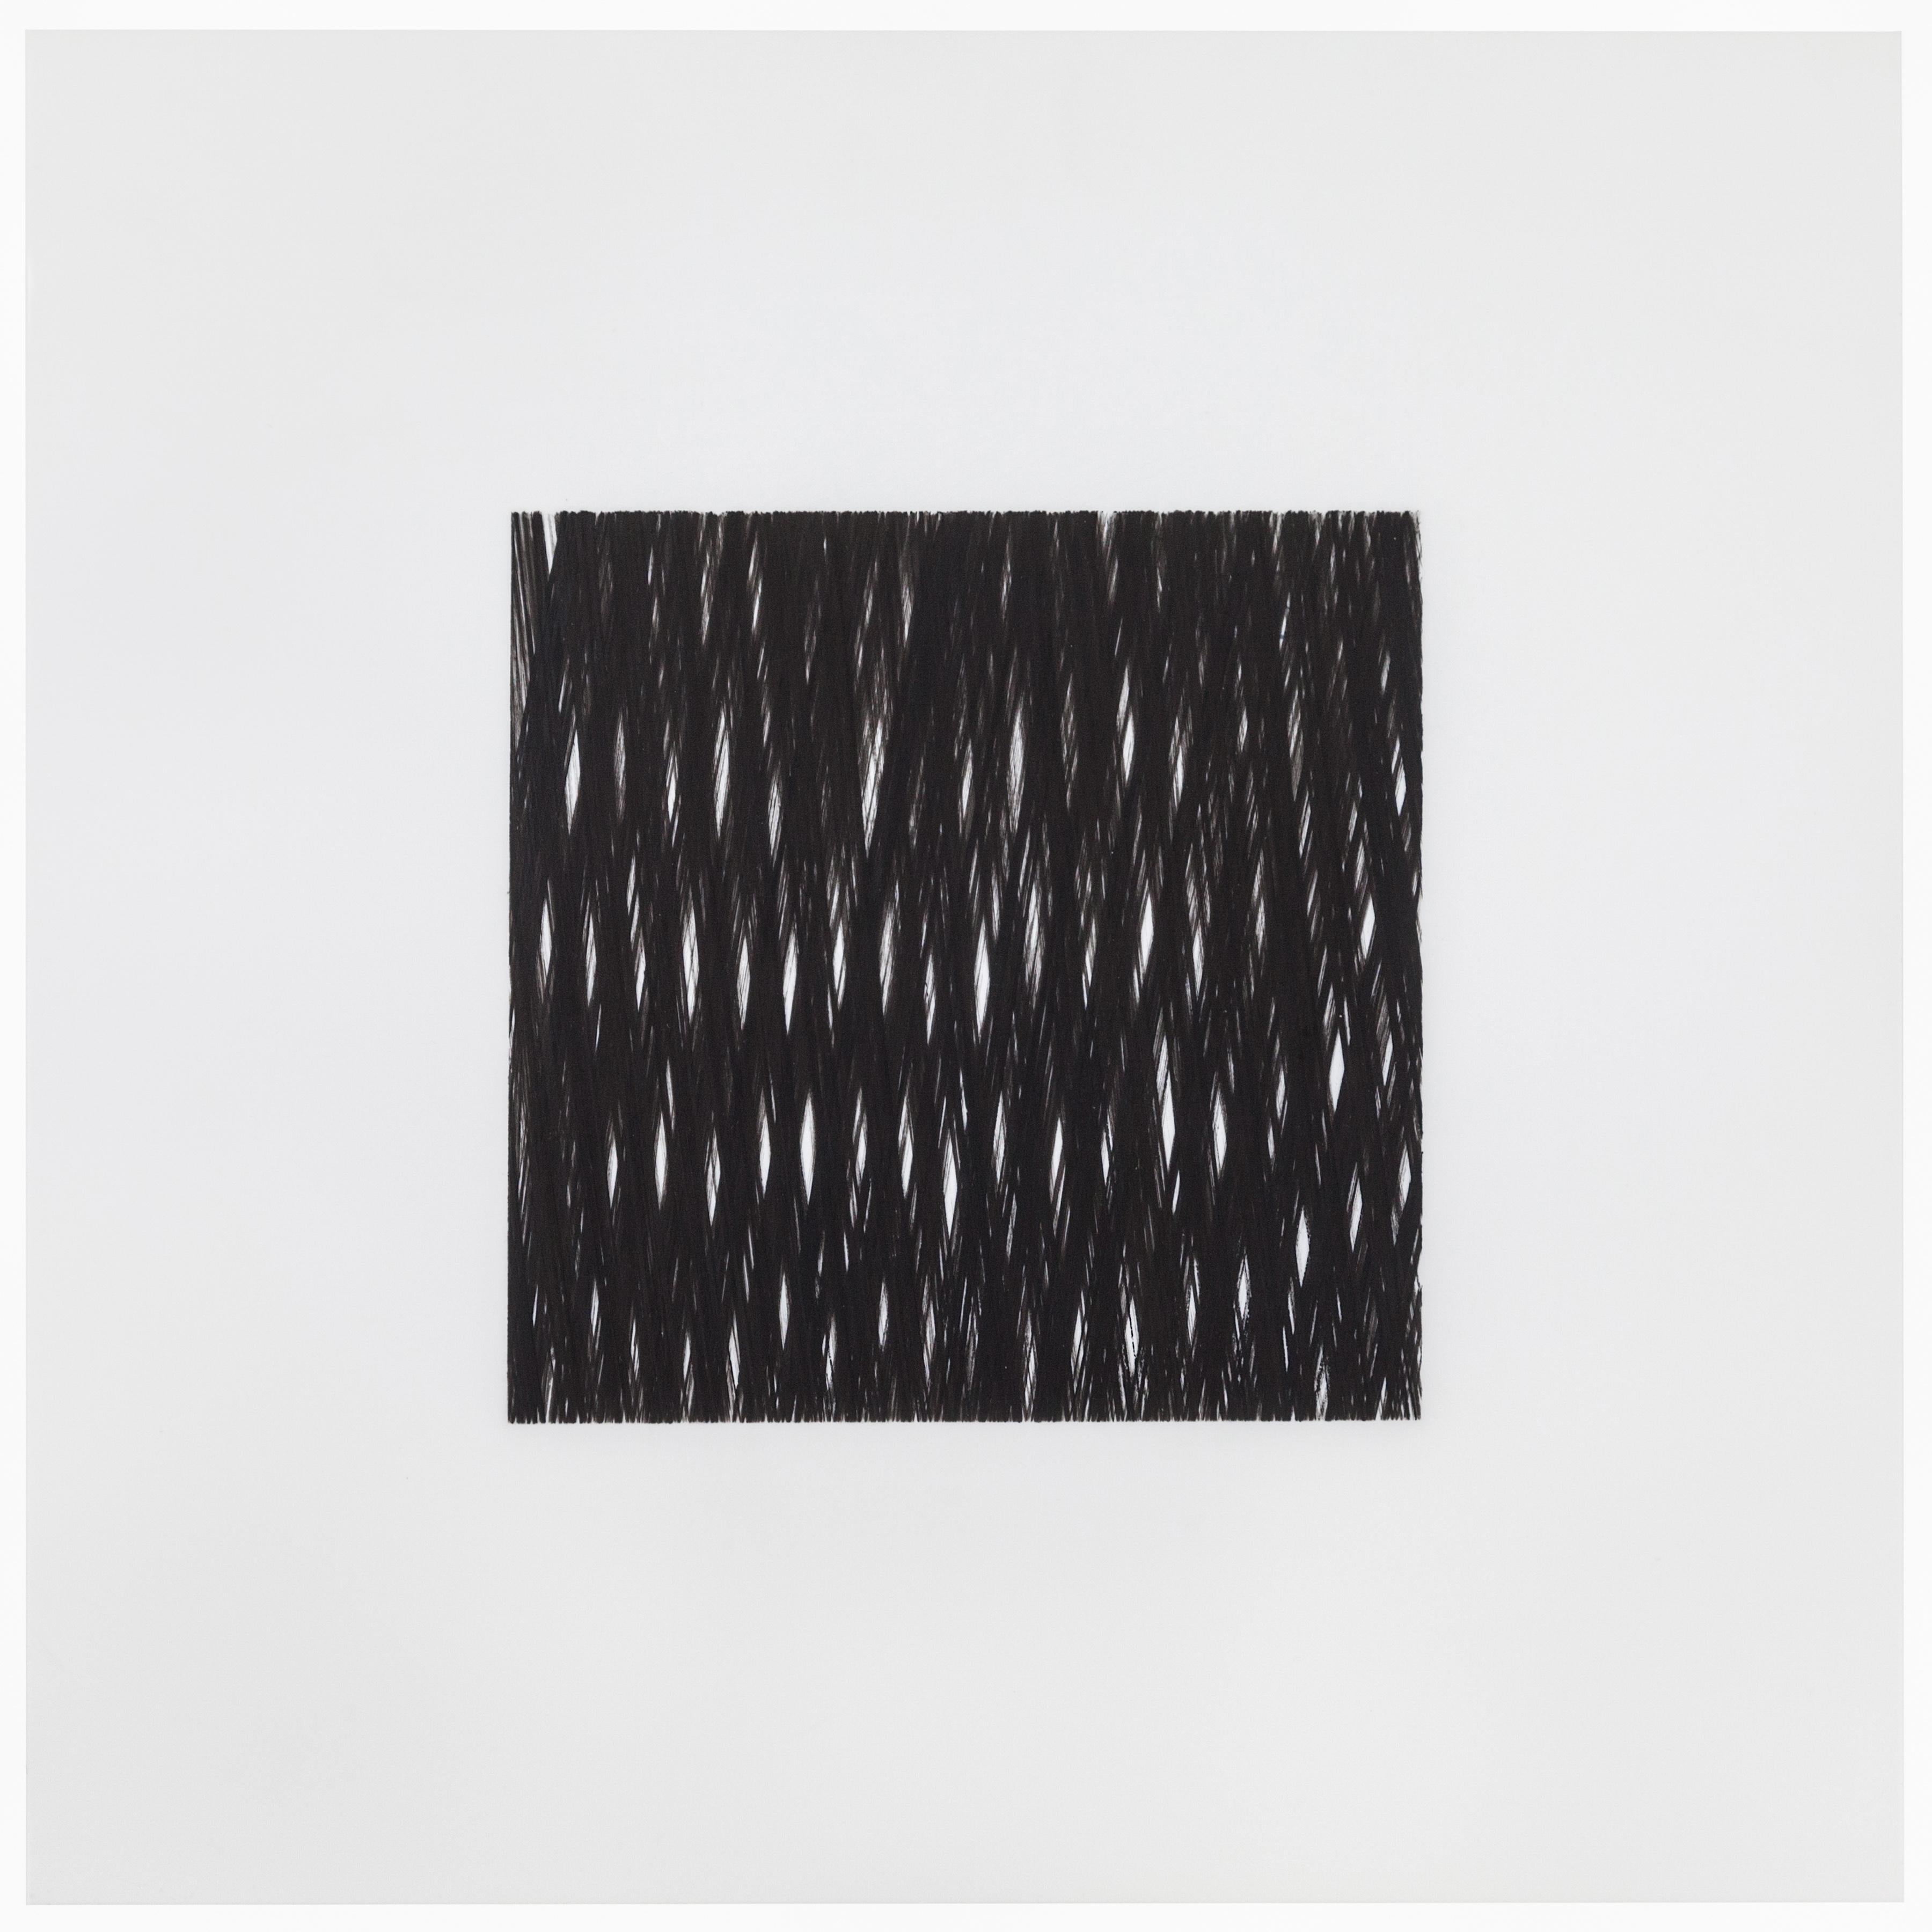 Contemporary Patrick Carrara Black Ink on Mylar Drawings, Appearance Series, 2013 - 2015 For Sale